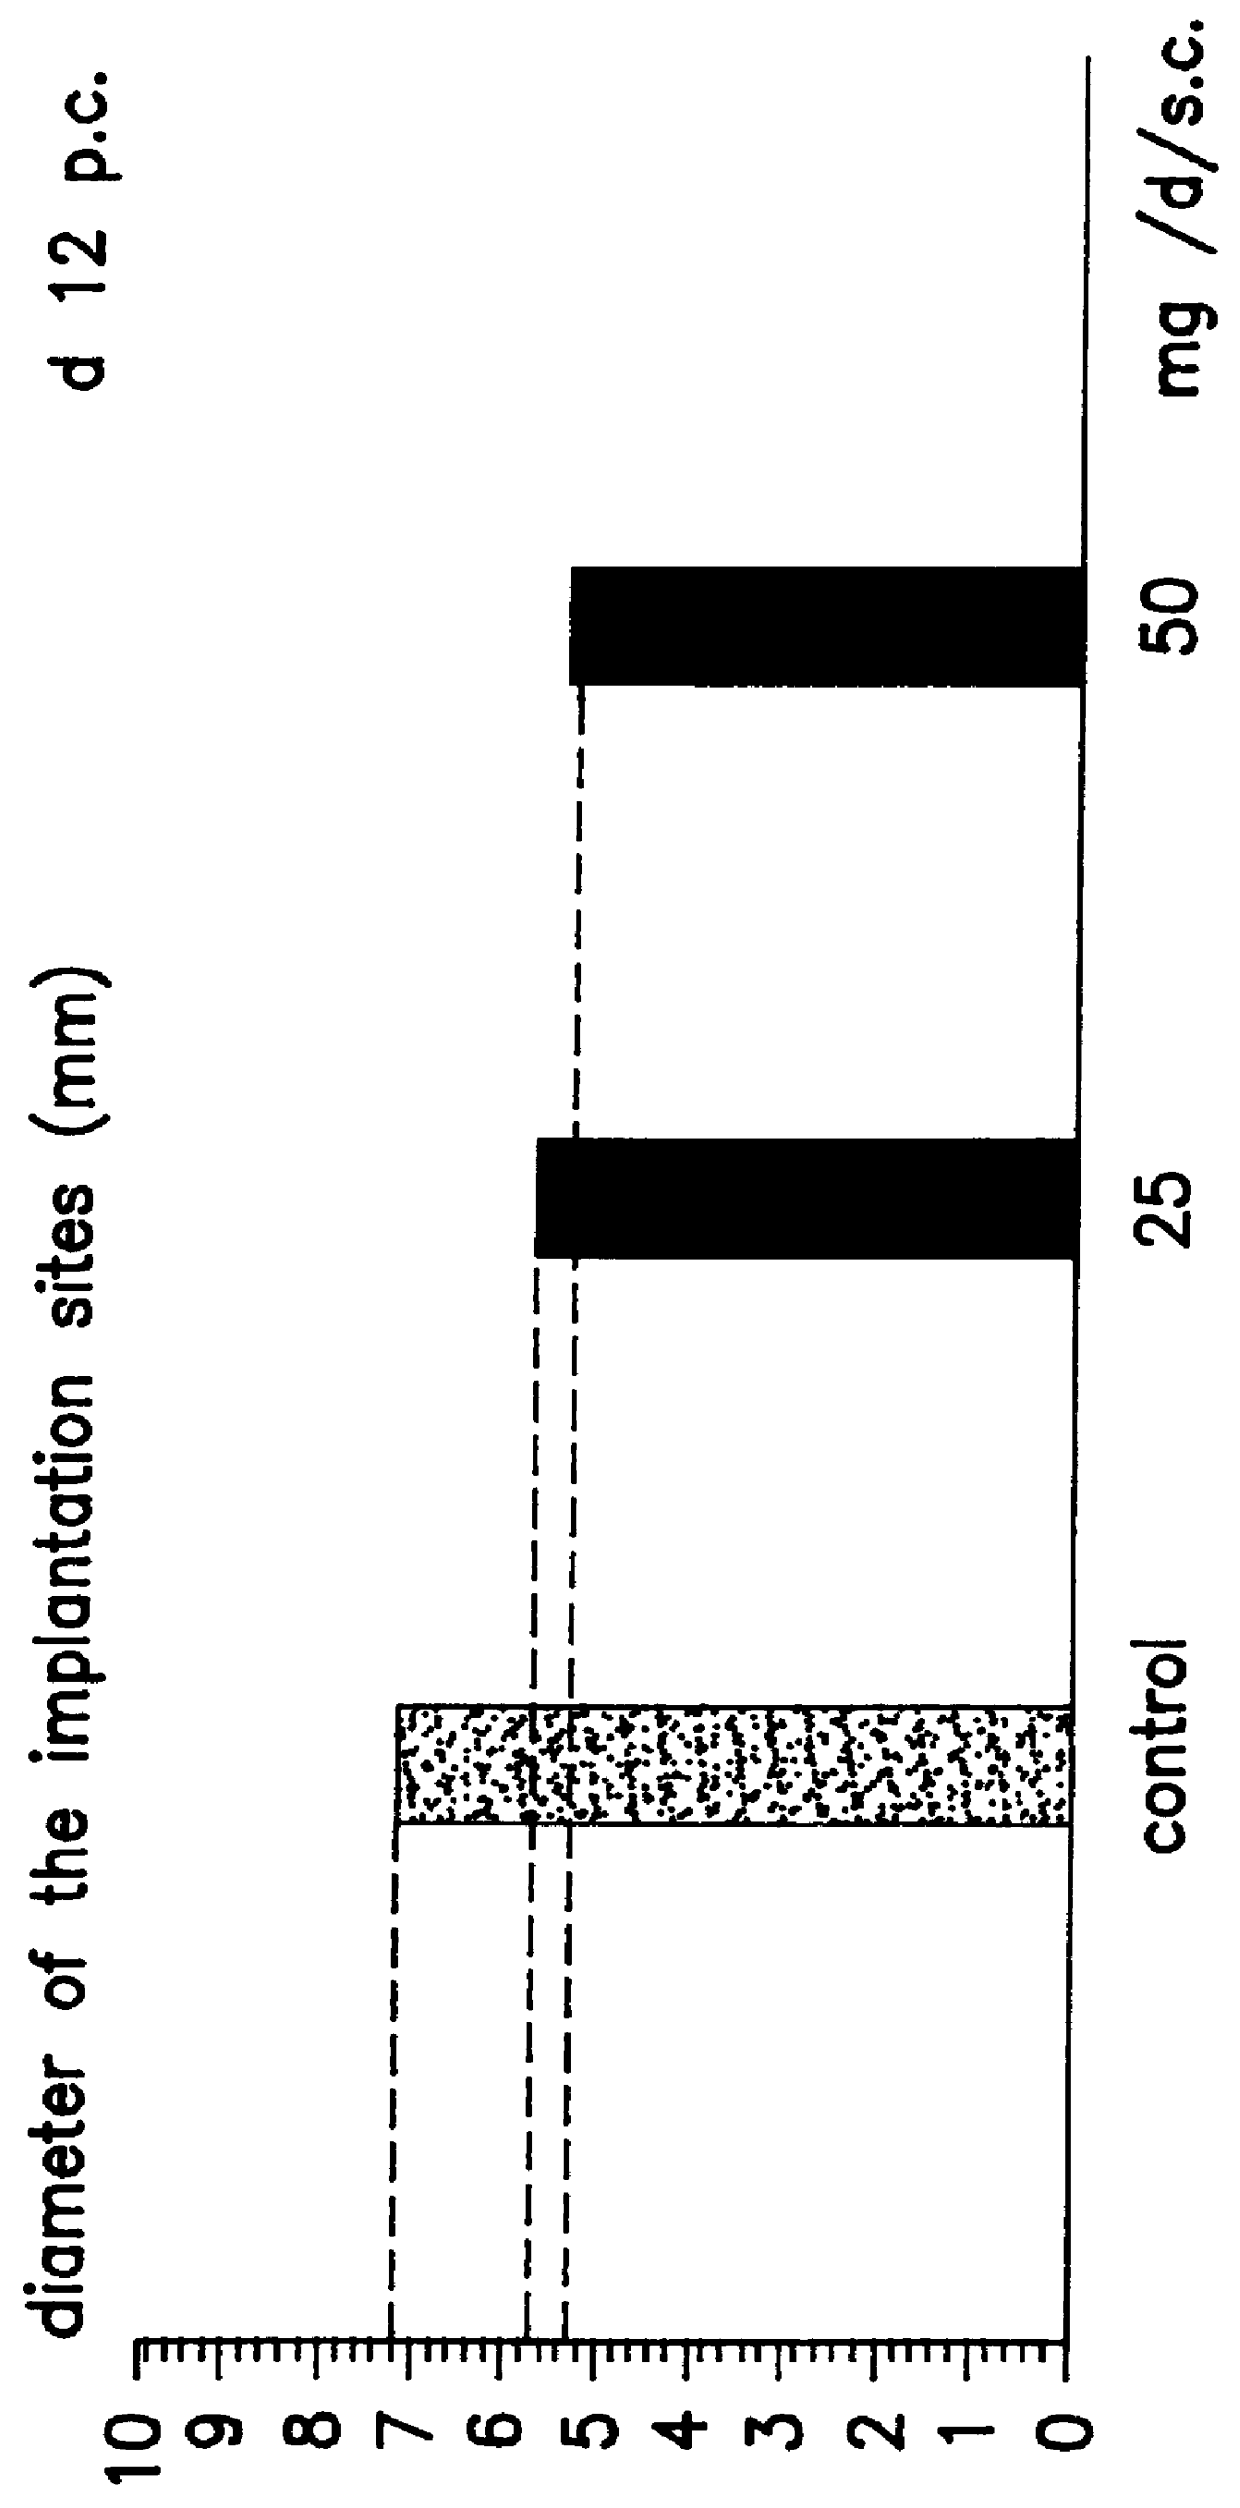 Implantation rates after in vitro fertilization, treatment of infertility and early pregnancy loss with a nitric oxide donor alone or in combination with progesterone, and a method for contraception with nitric oxide inhibitors